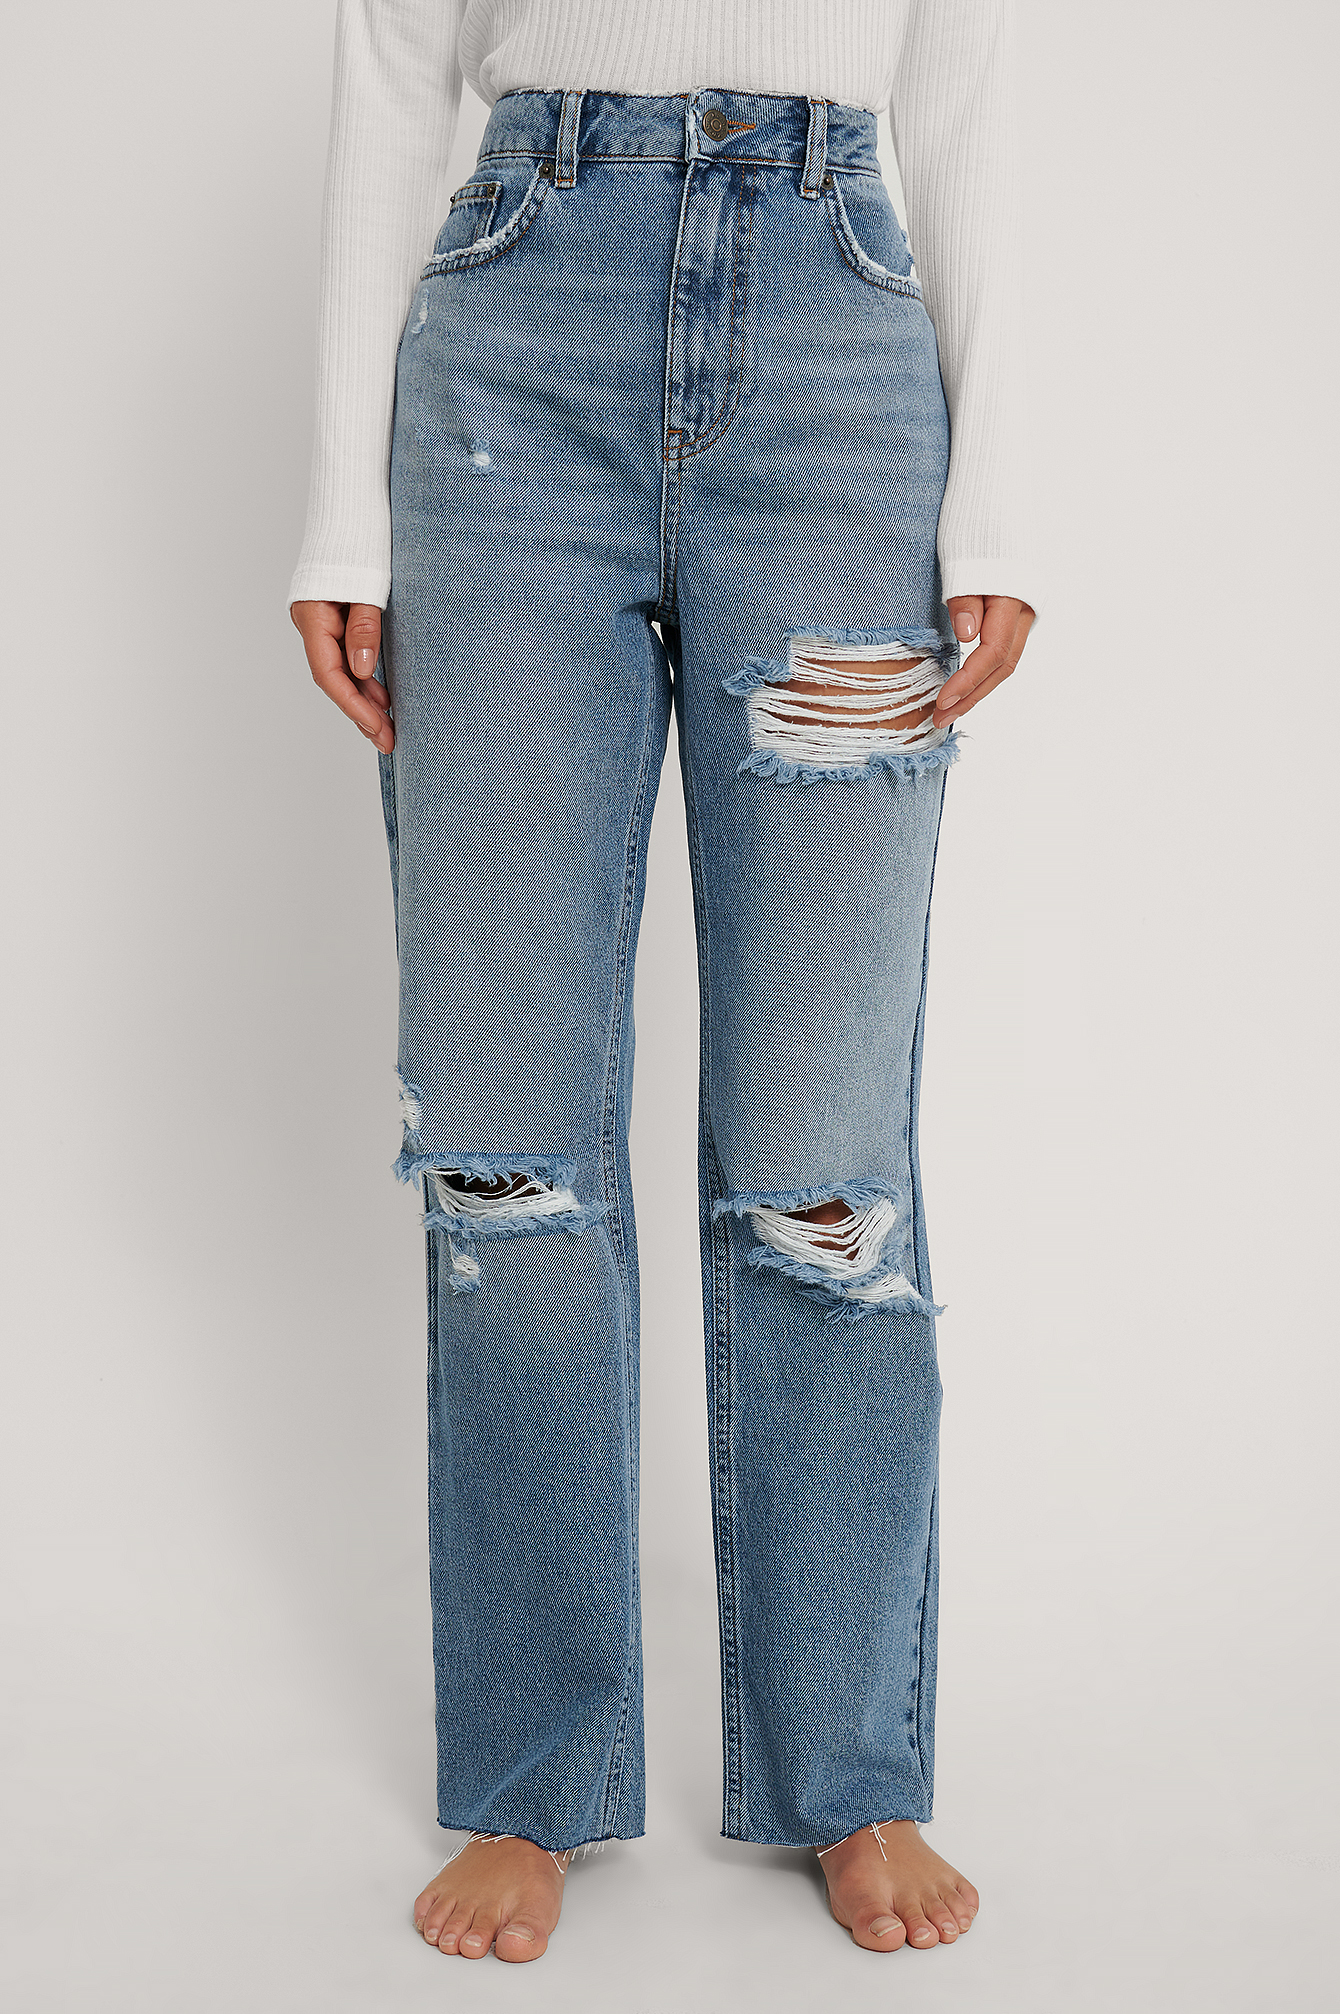 Damen Kleidung Jeans Ripped Jeans Vila Ripped Jeans Vila Hose Usedlook 